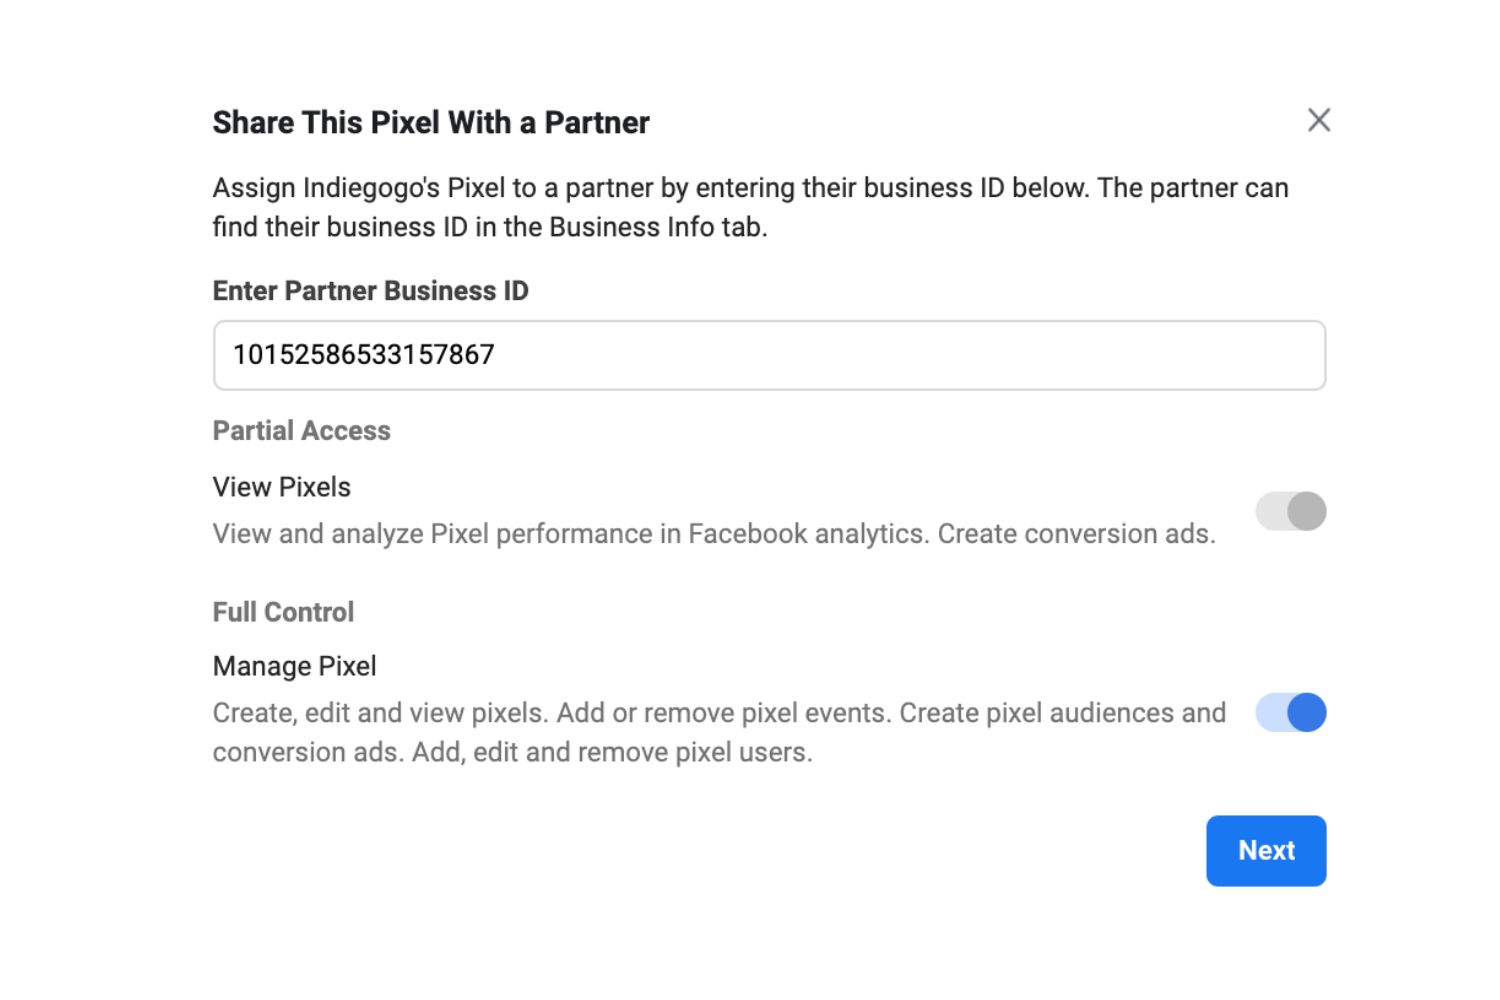 How To Add A Facebook Pixel To Indiegogo